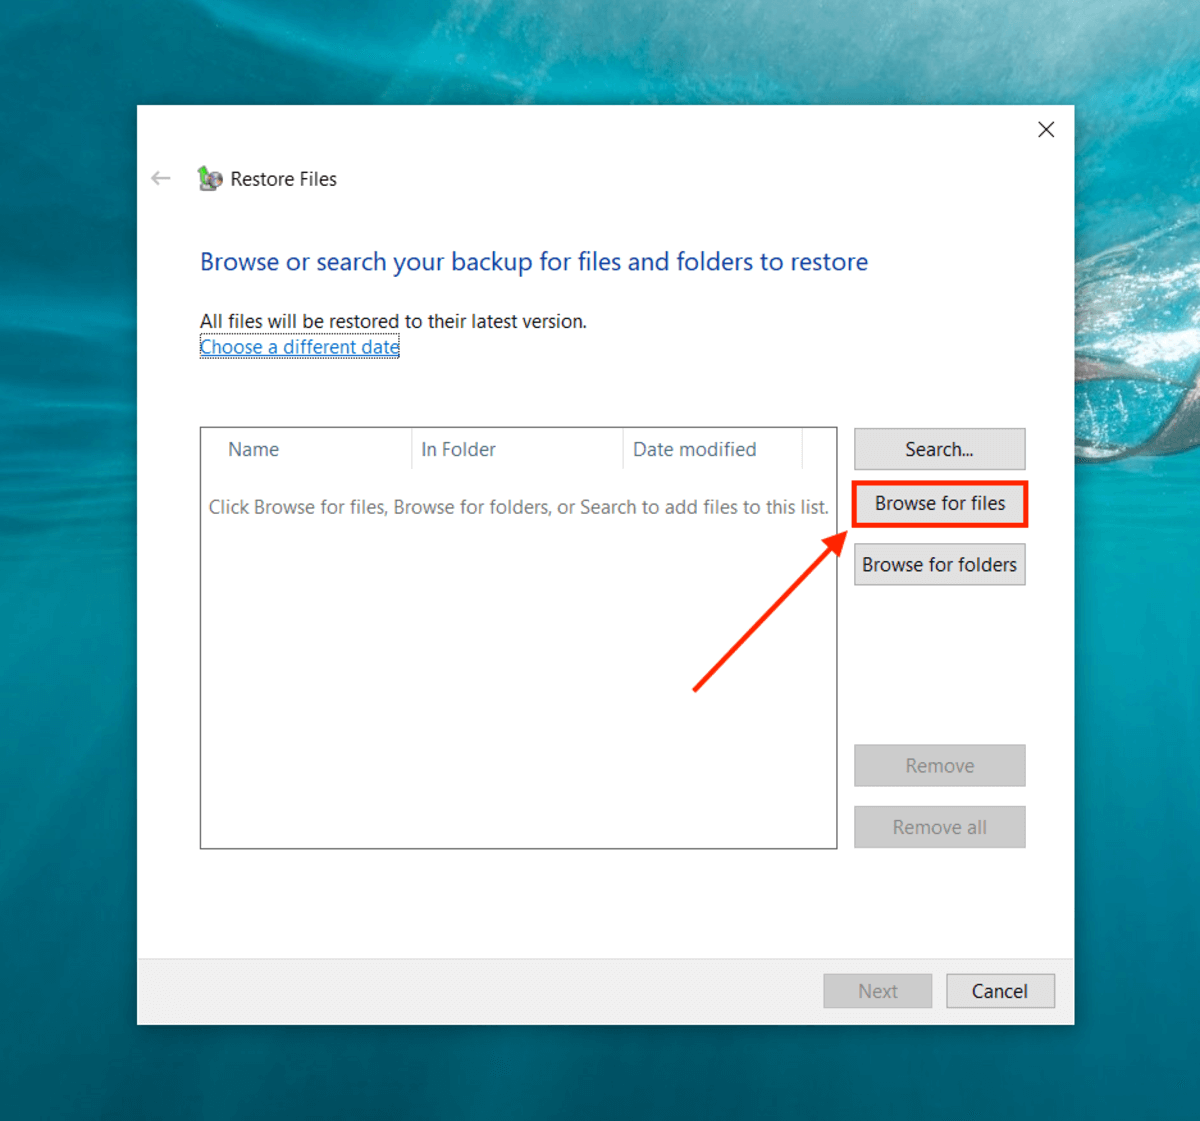 Browse for files button in the Restore Files window